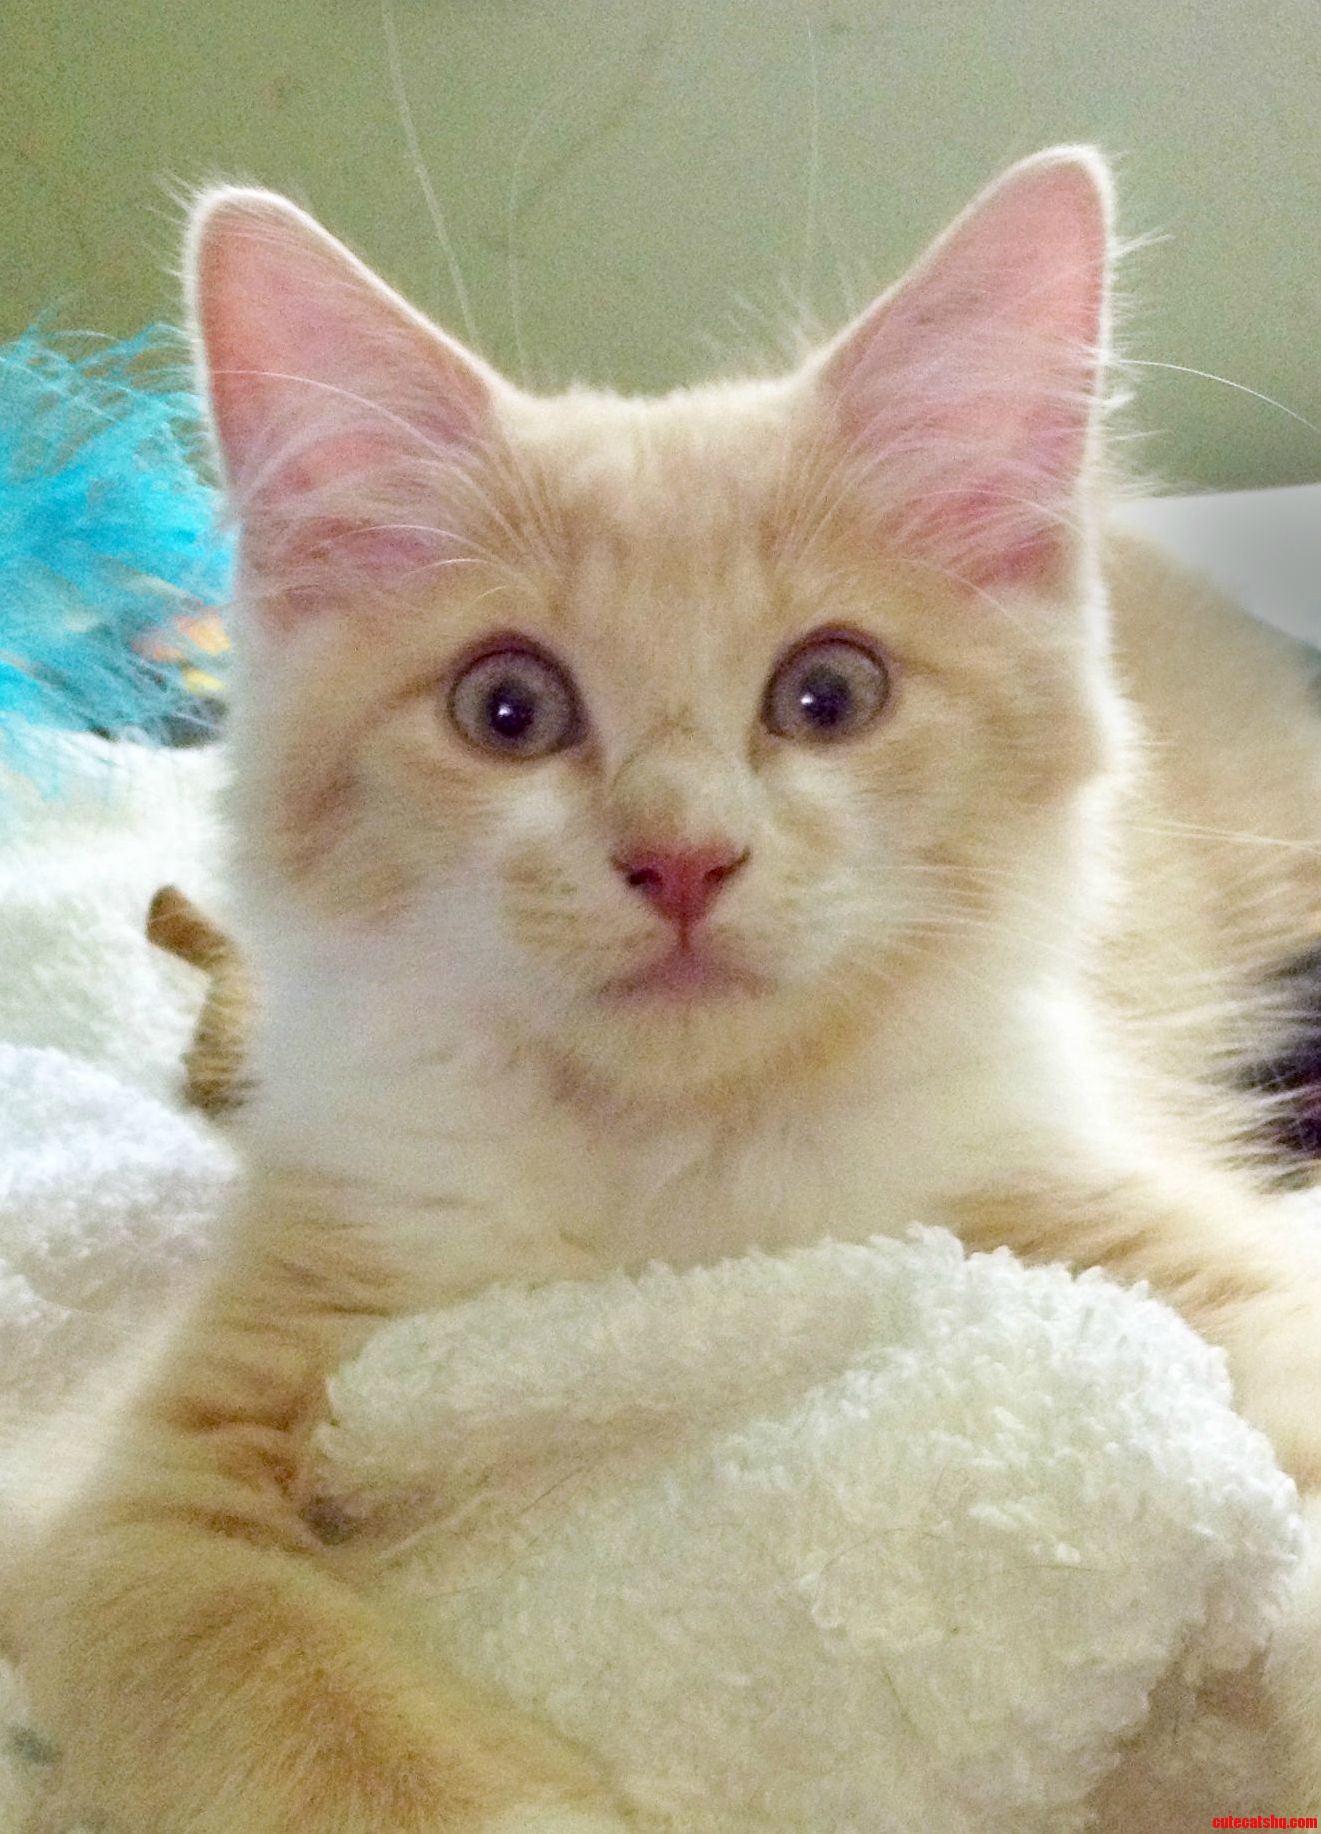 This Is The Look My Newly-Adopted 8 Week-Old Kitten Gave Me When He Heard My Dogs Howl